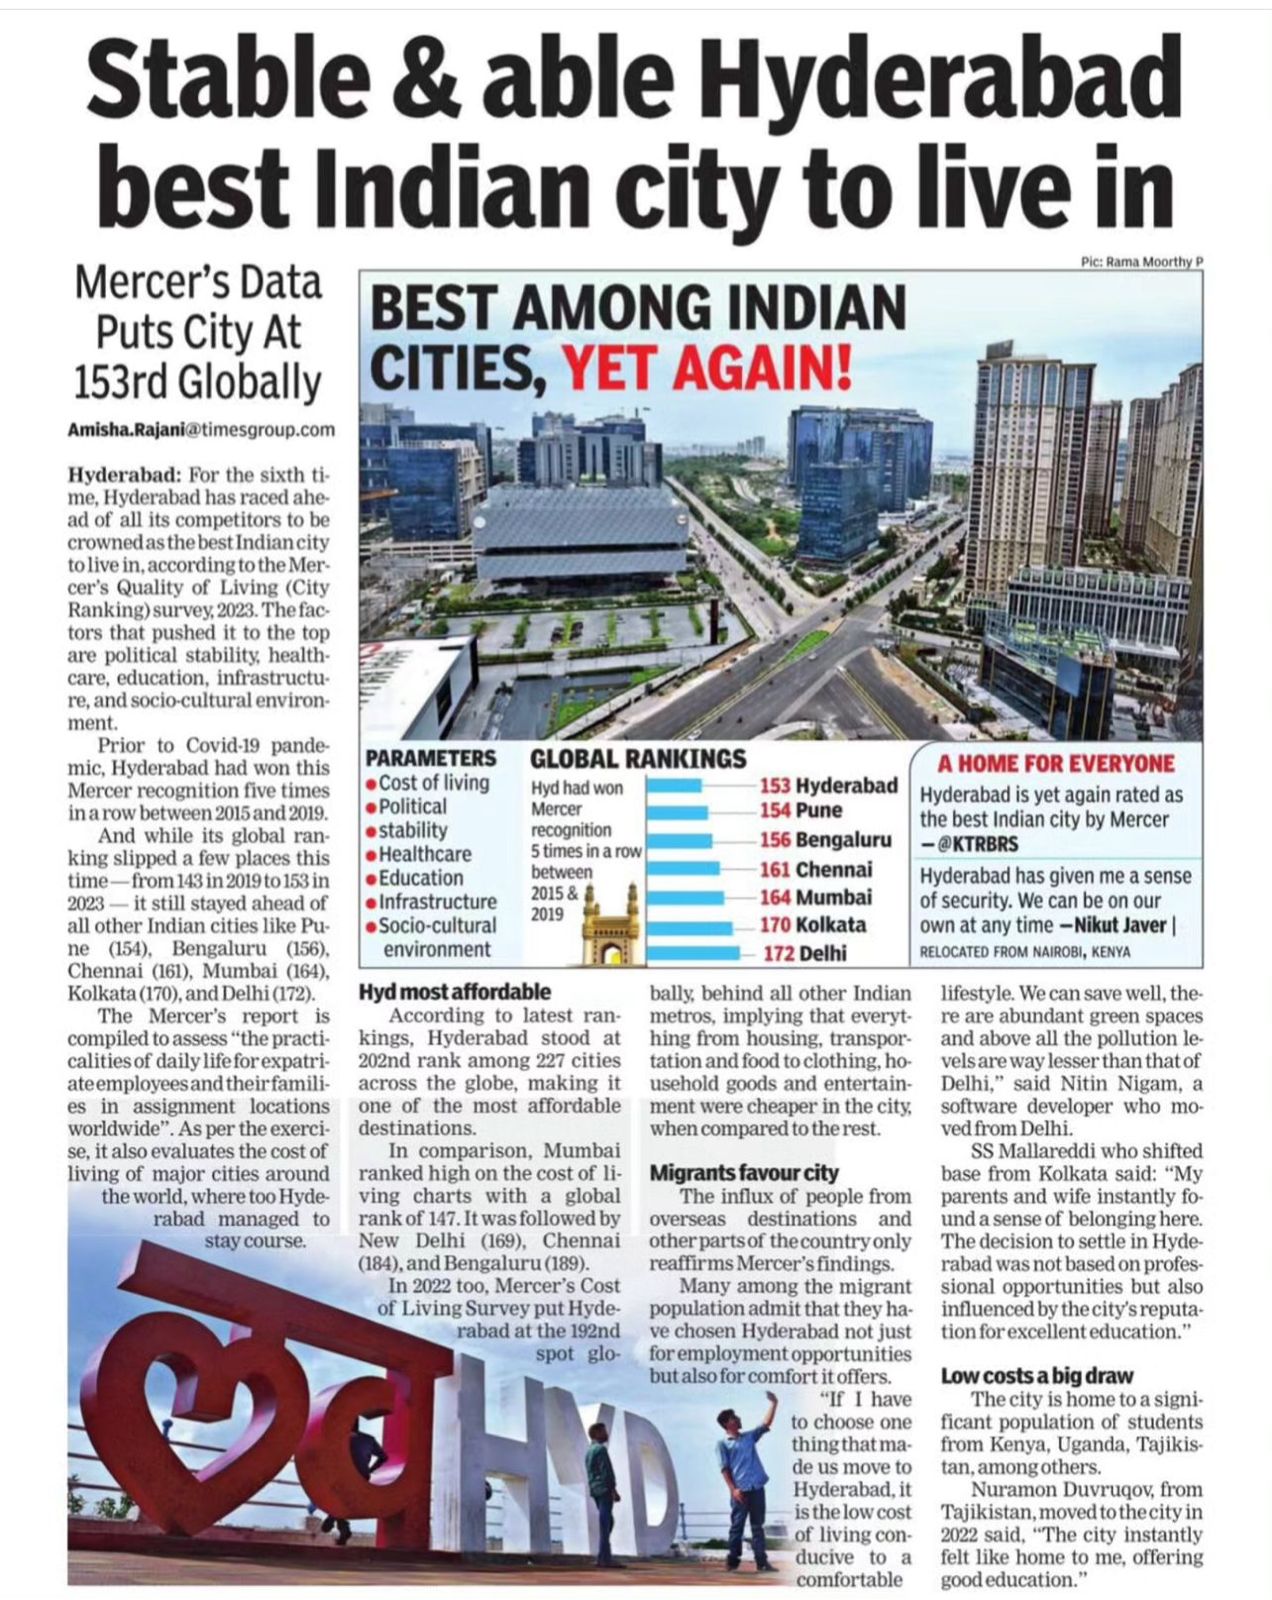 Stable & able Hyderabad best Indian city to live in